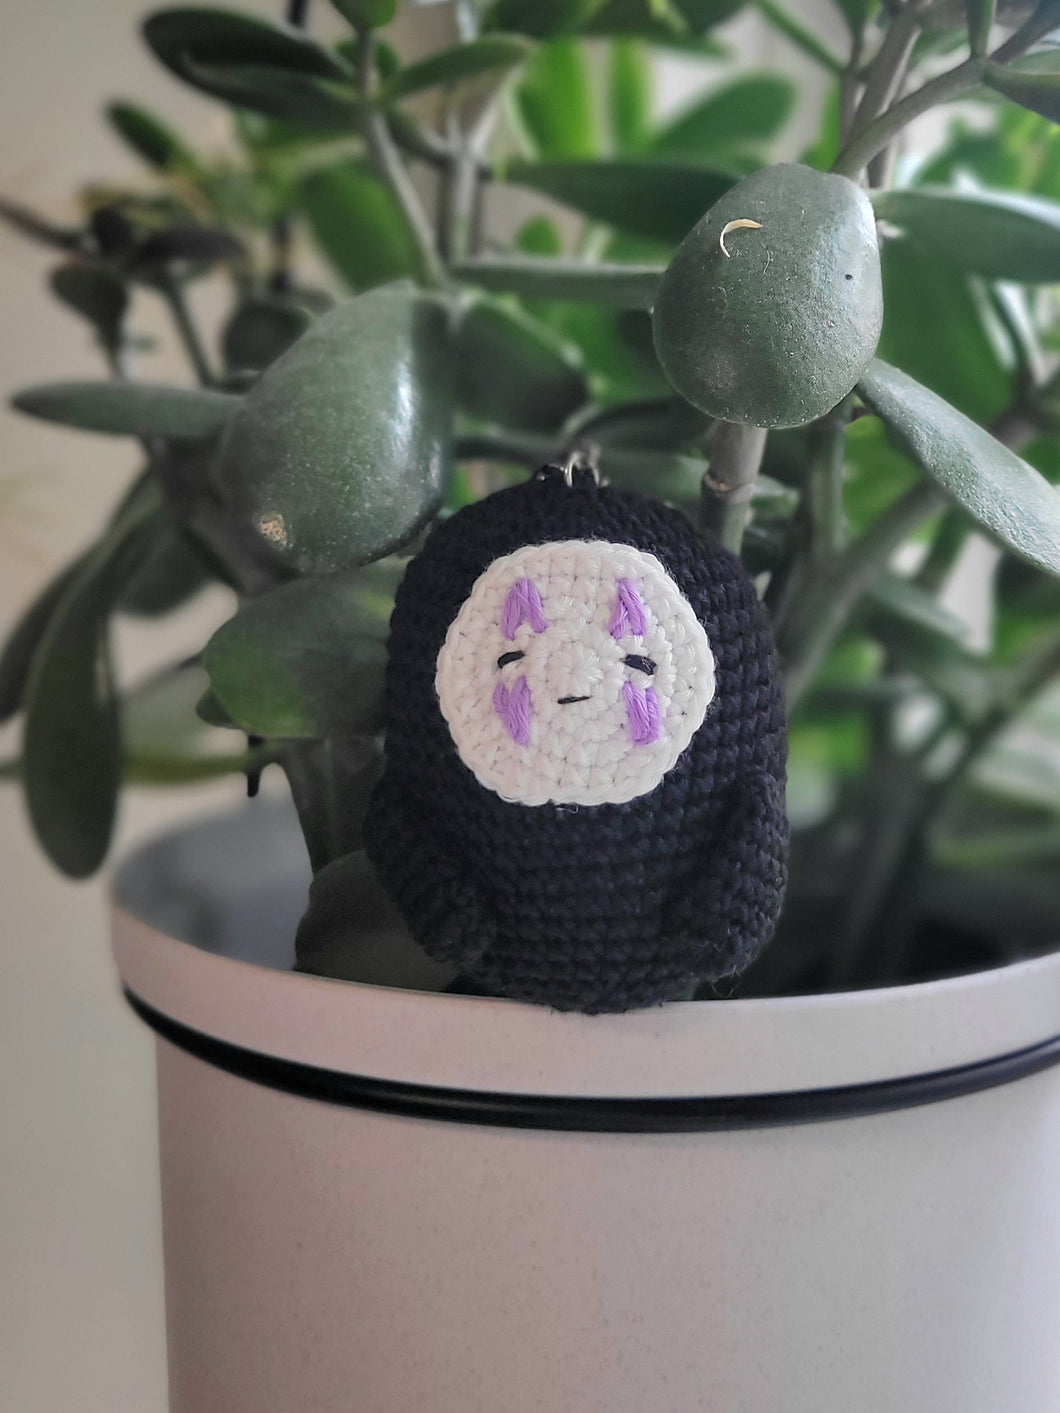 No Face keychain/ornament